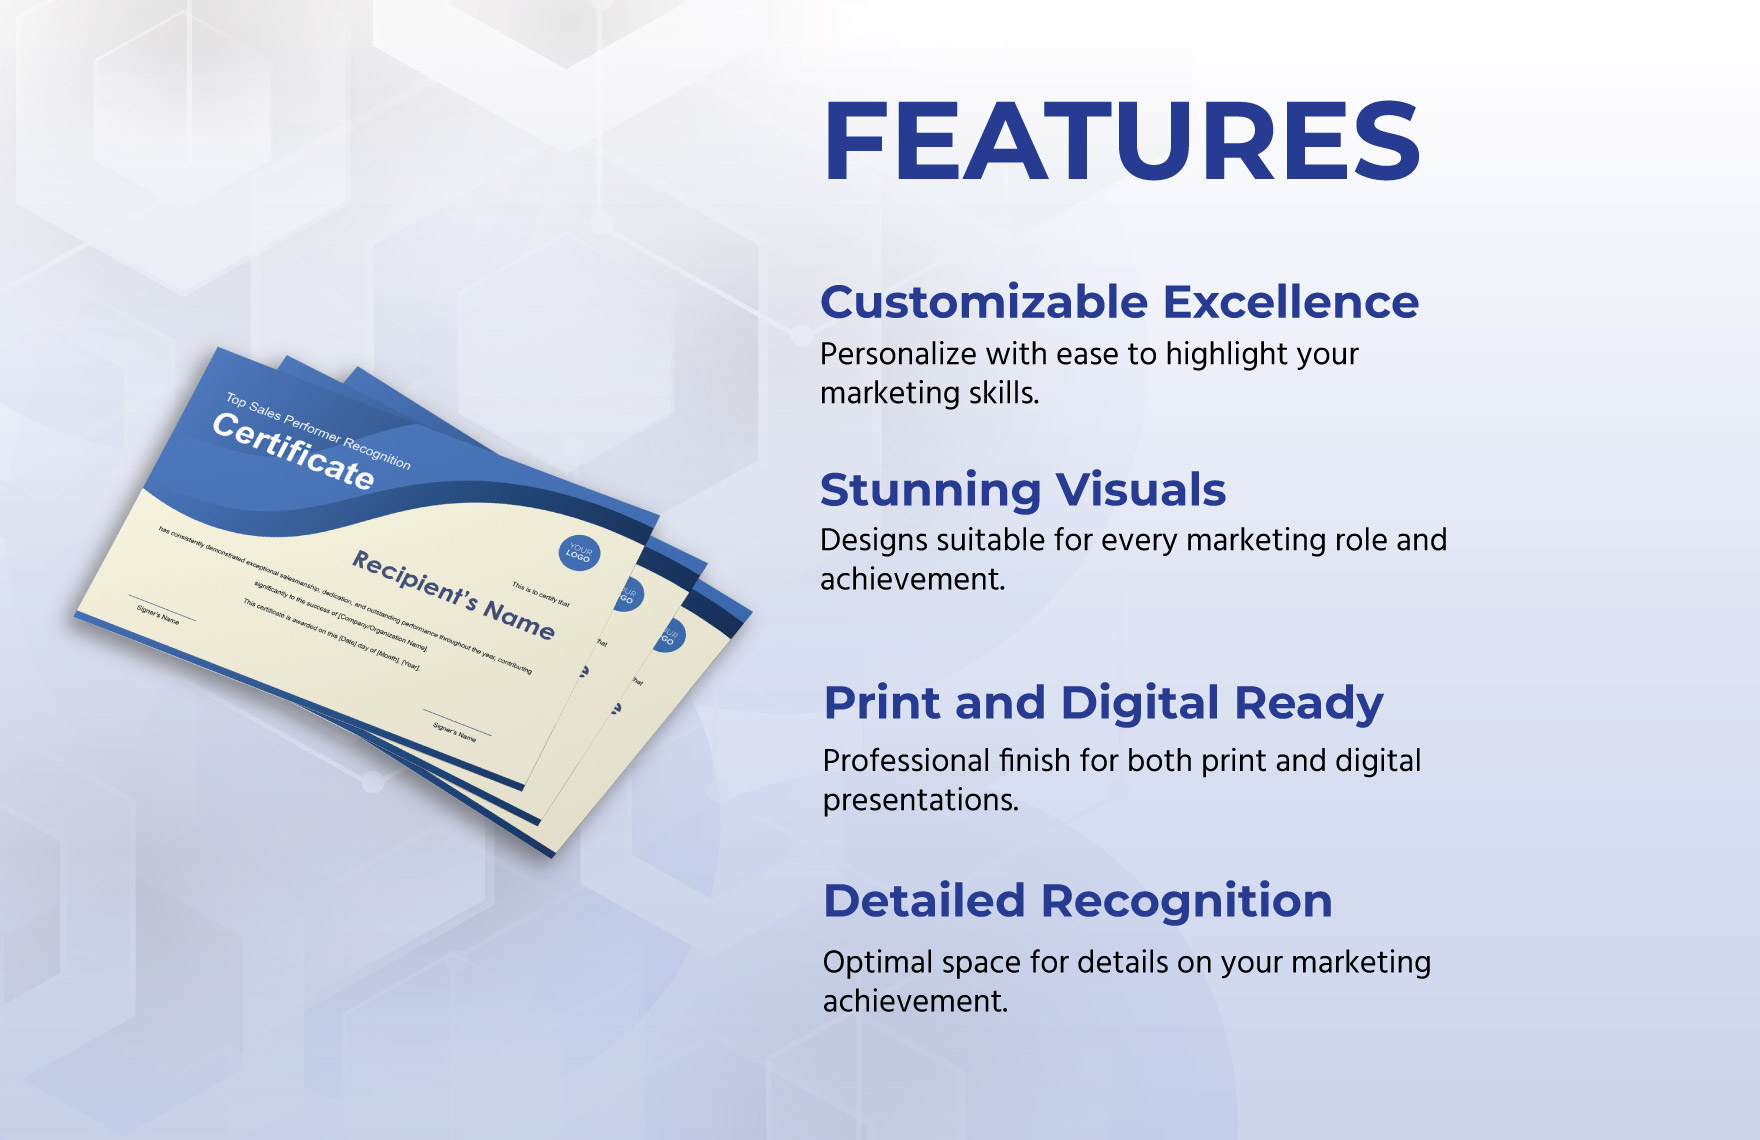 Top Sales Performer Recognition Certificate Template